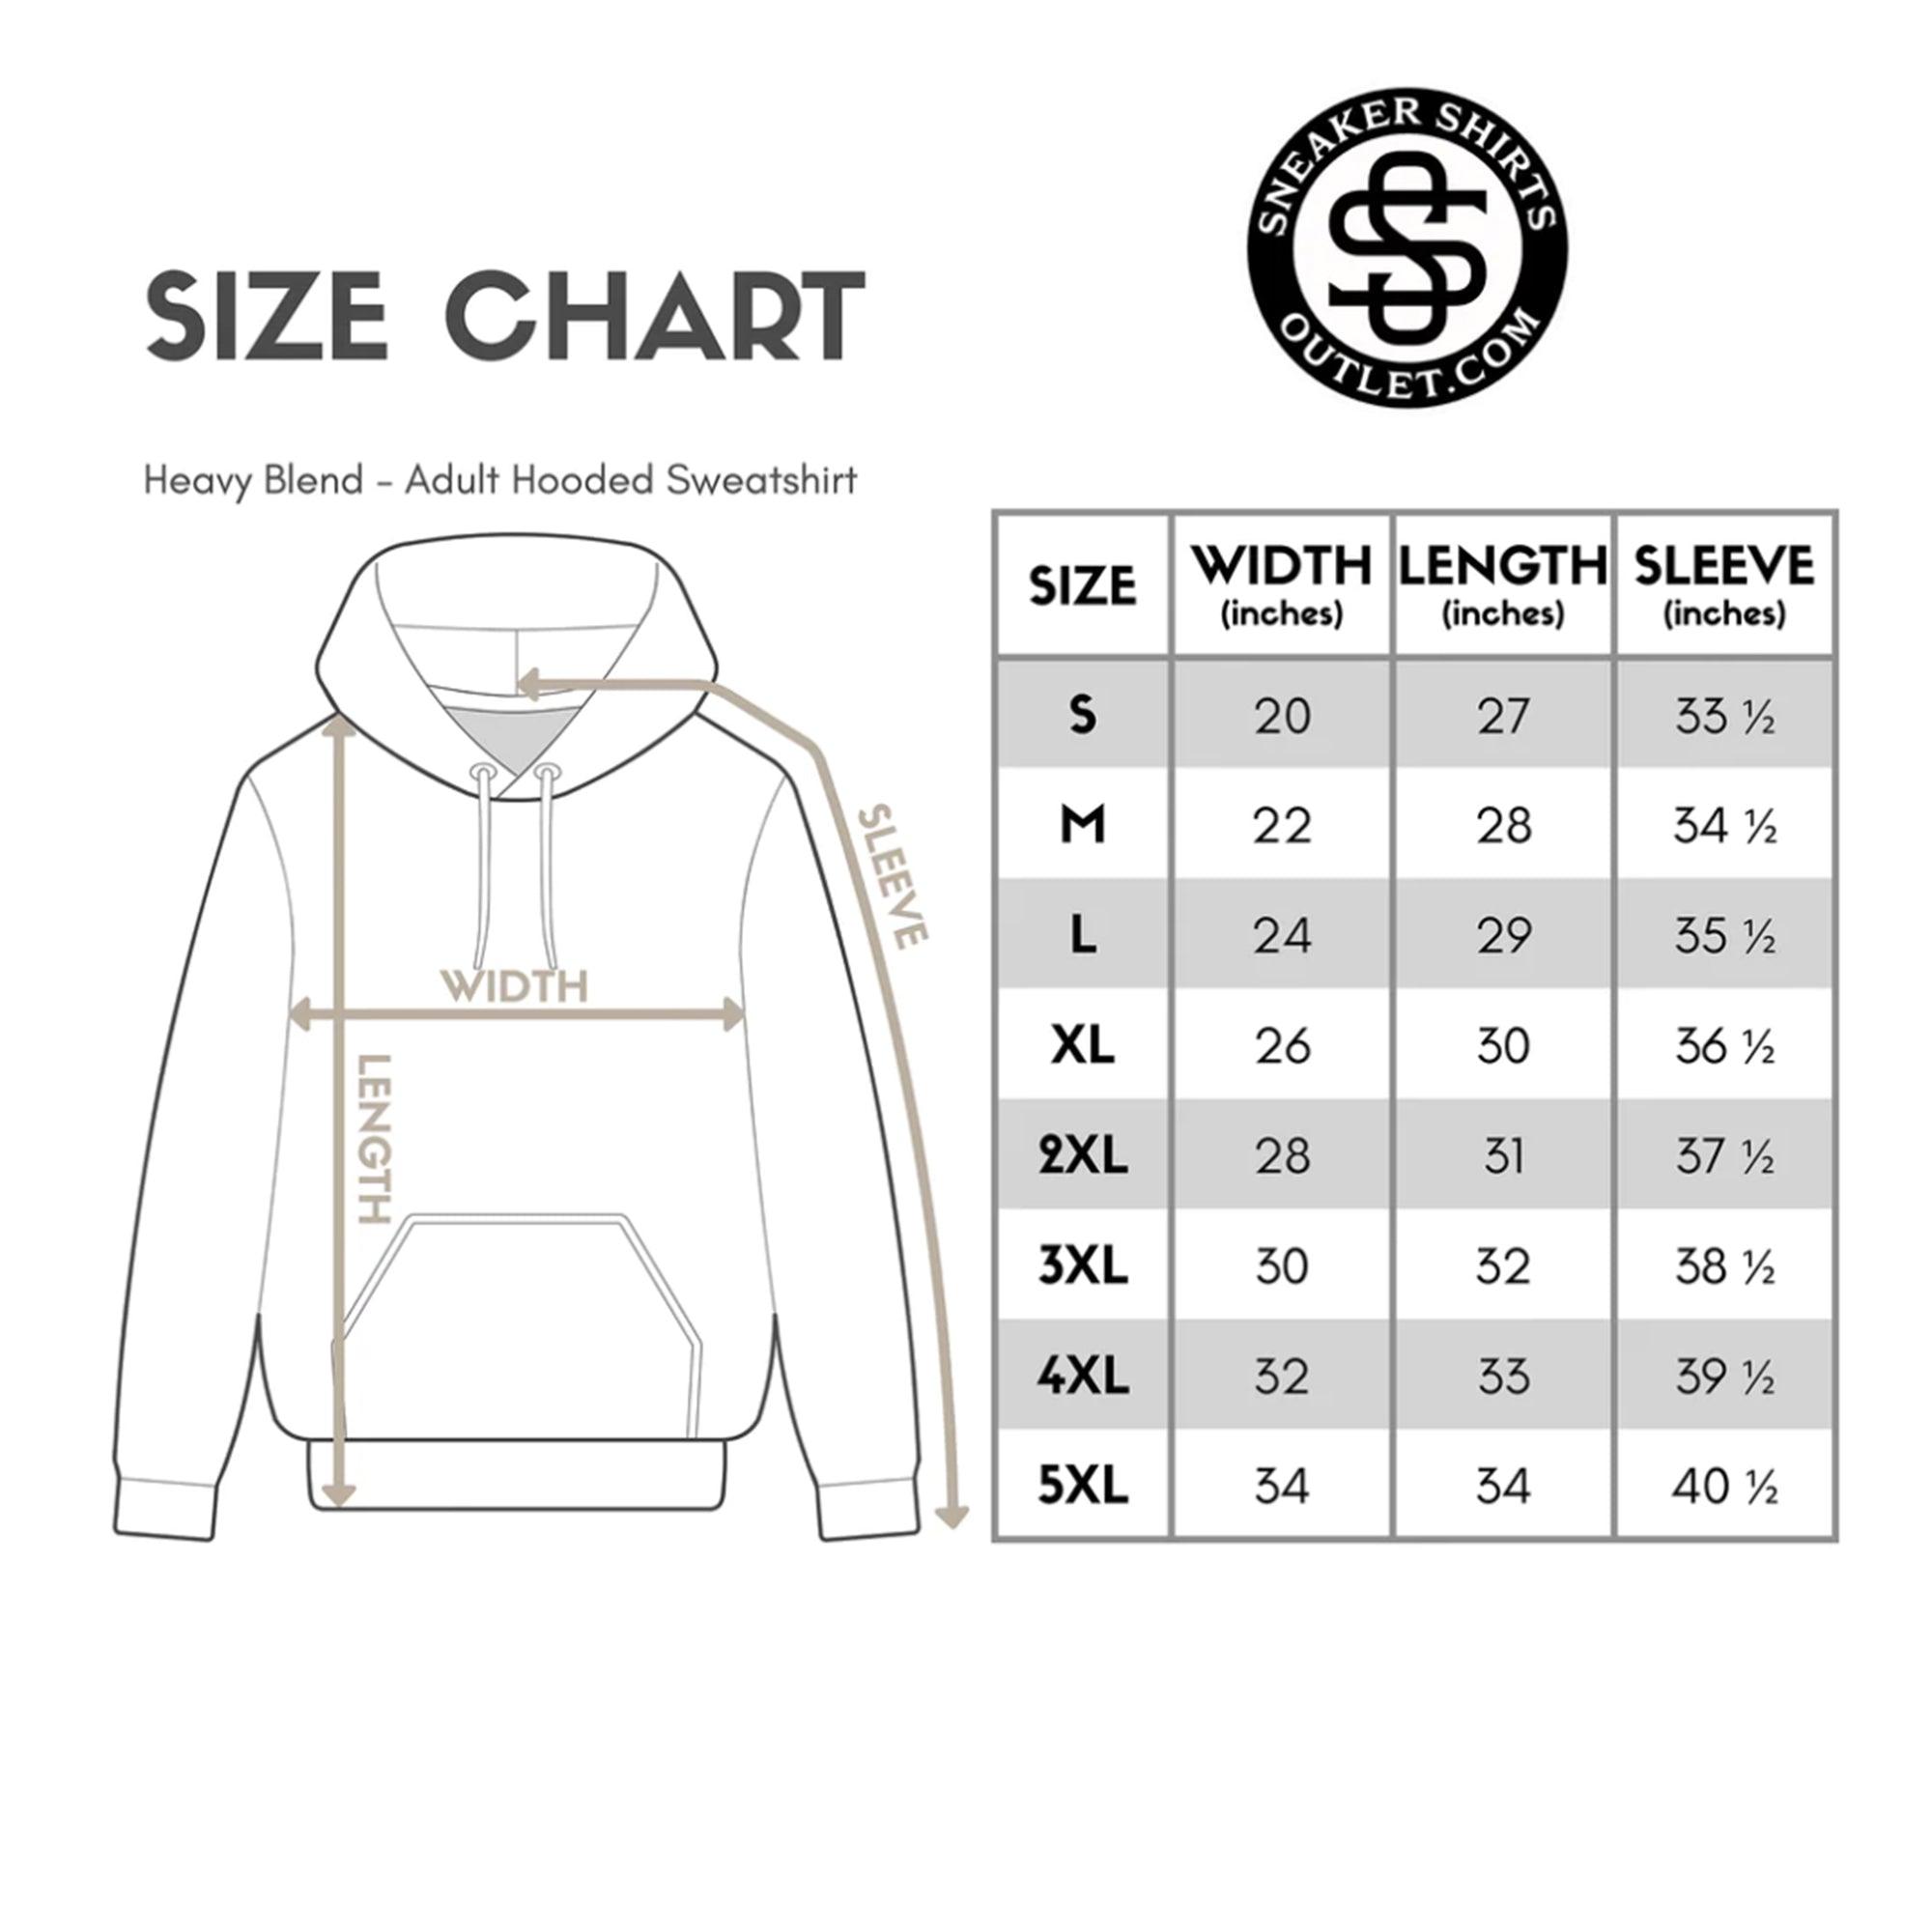 size chart Money On My Mind Hoodie Yeezy Boost 700 Bright Blue photo